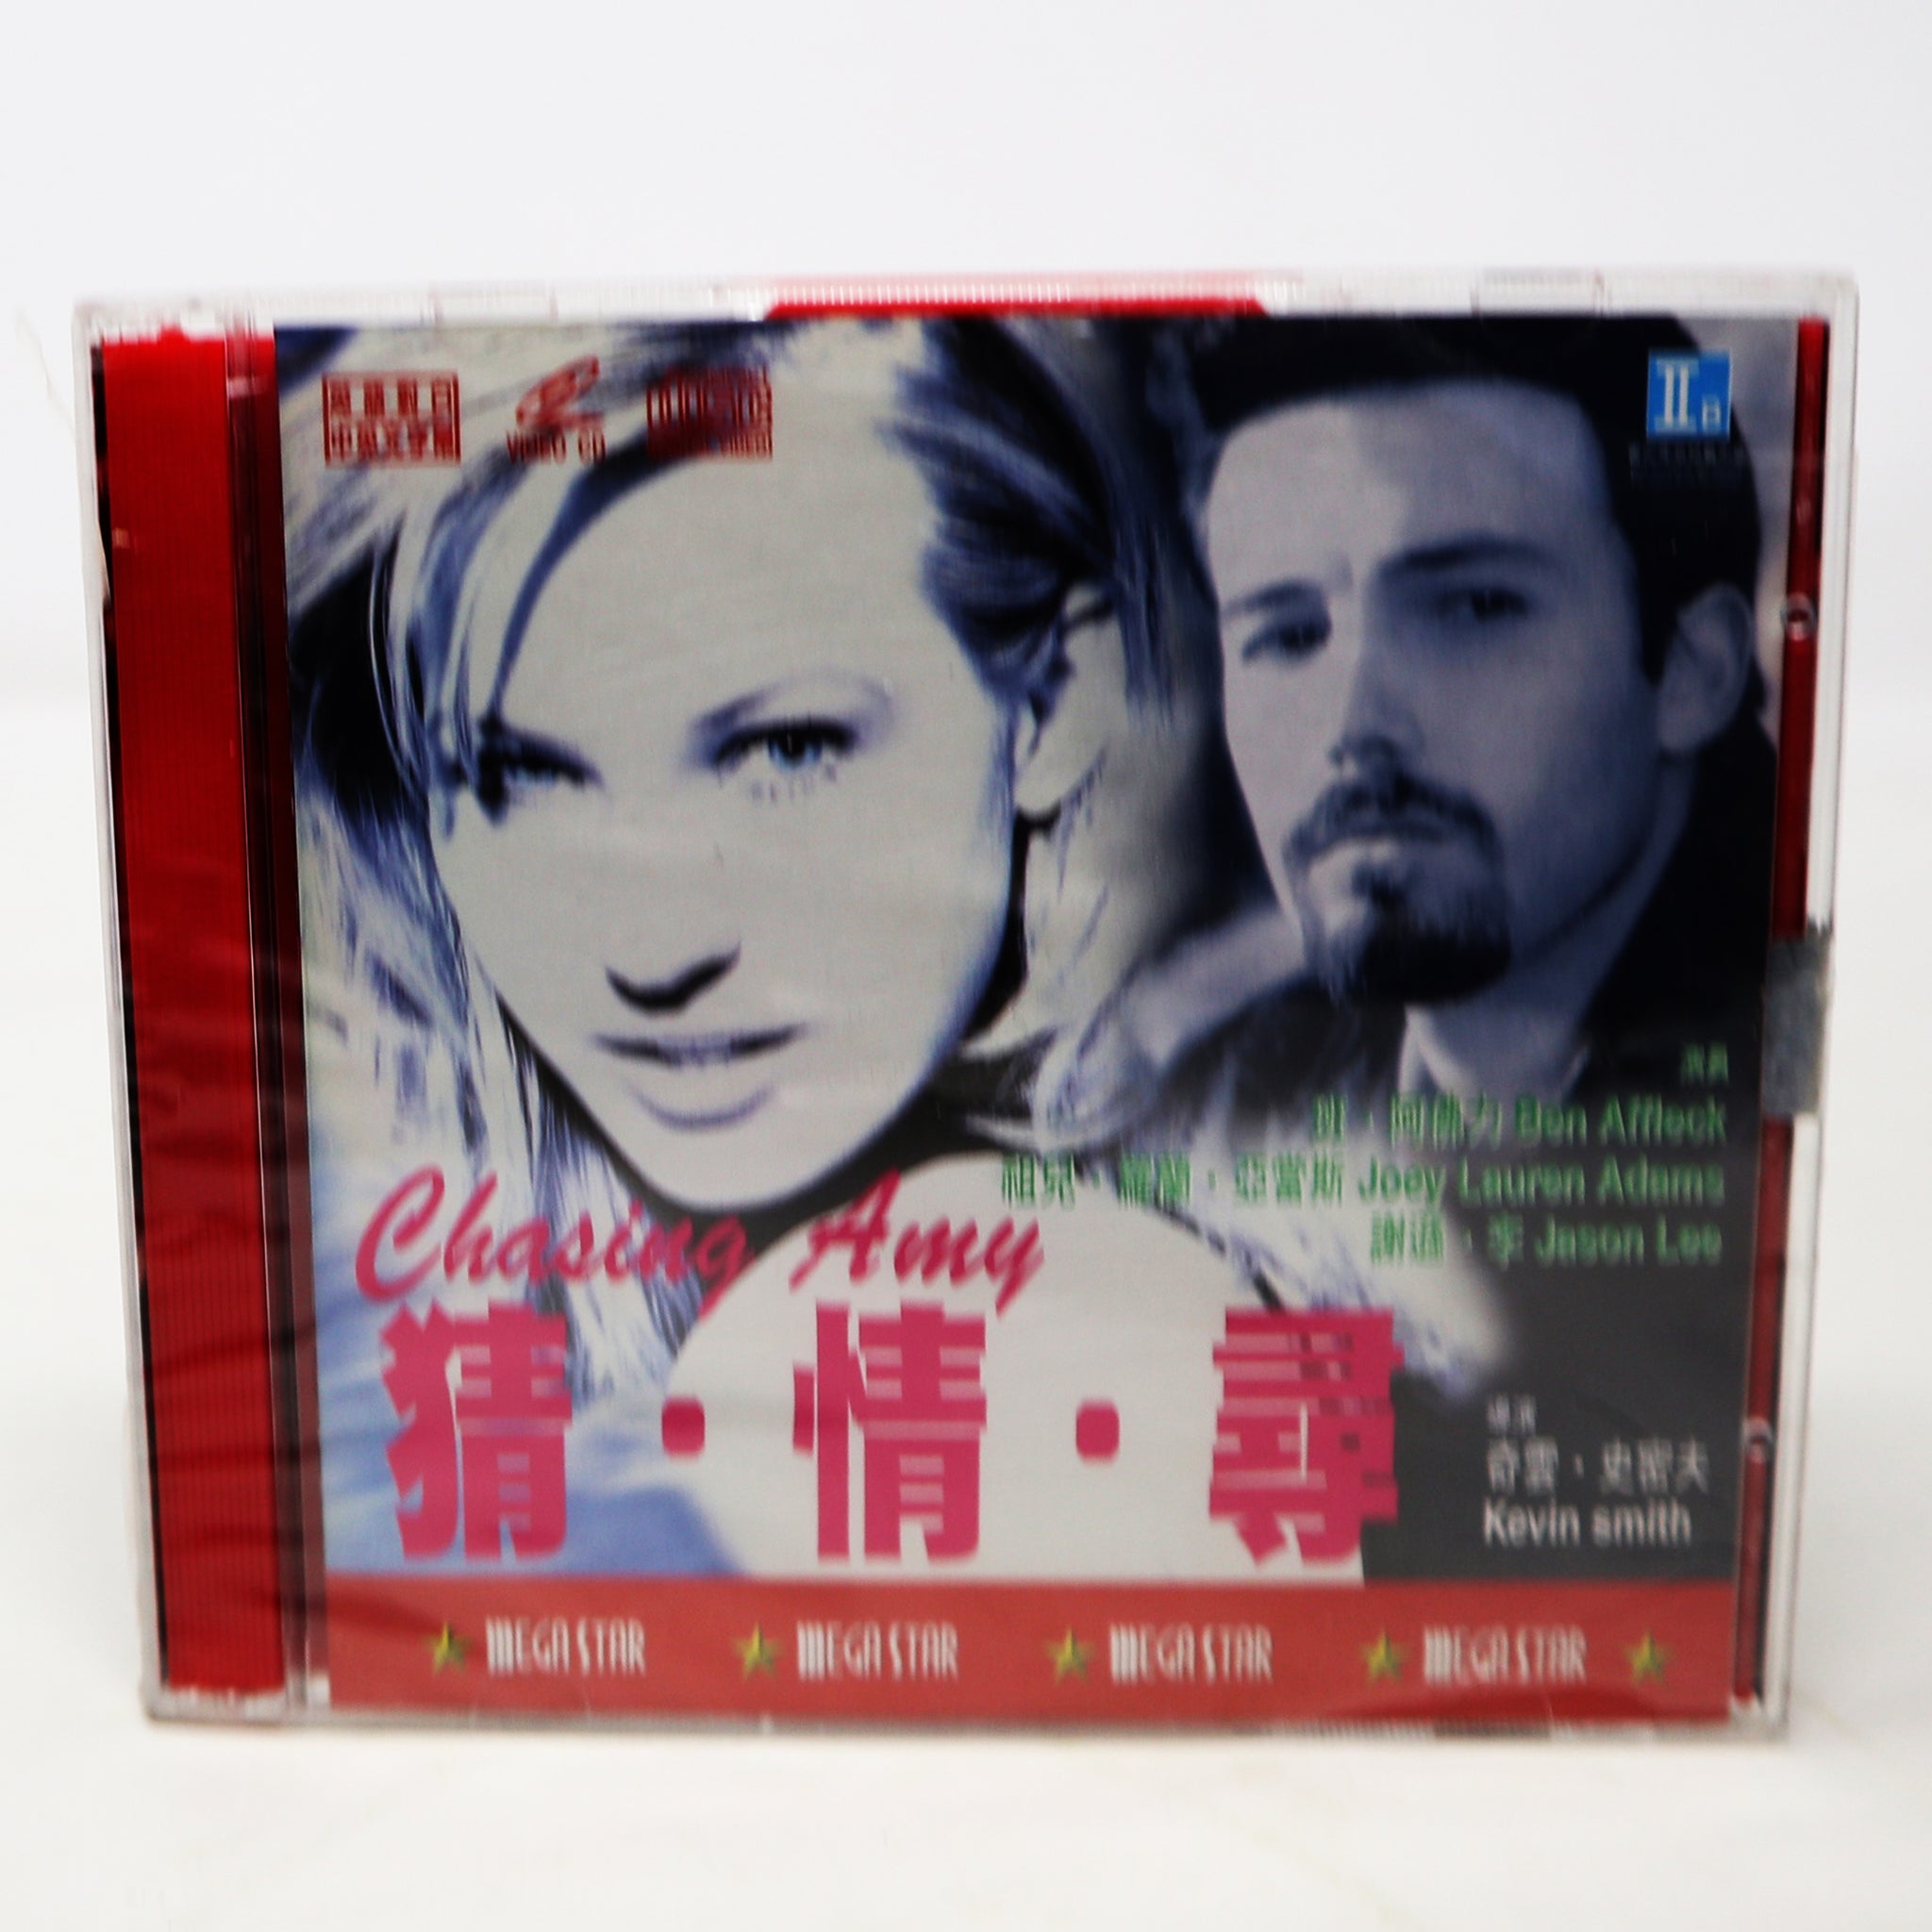 Kevin Smith Chasing Amy VCD Video CD Part Sealed Rare Ben Affleck Joey Lauren Adams Jason Lee